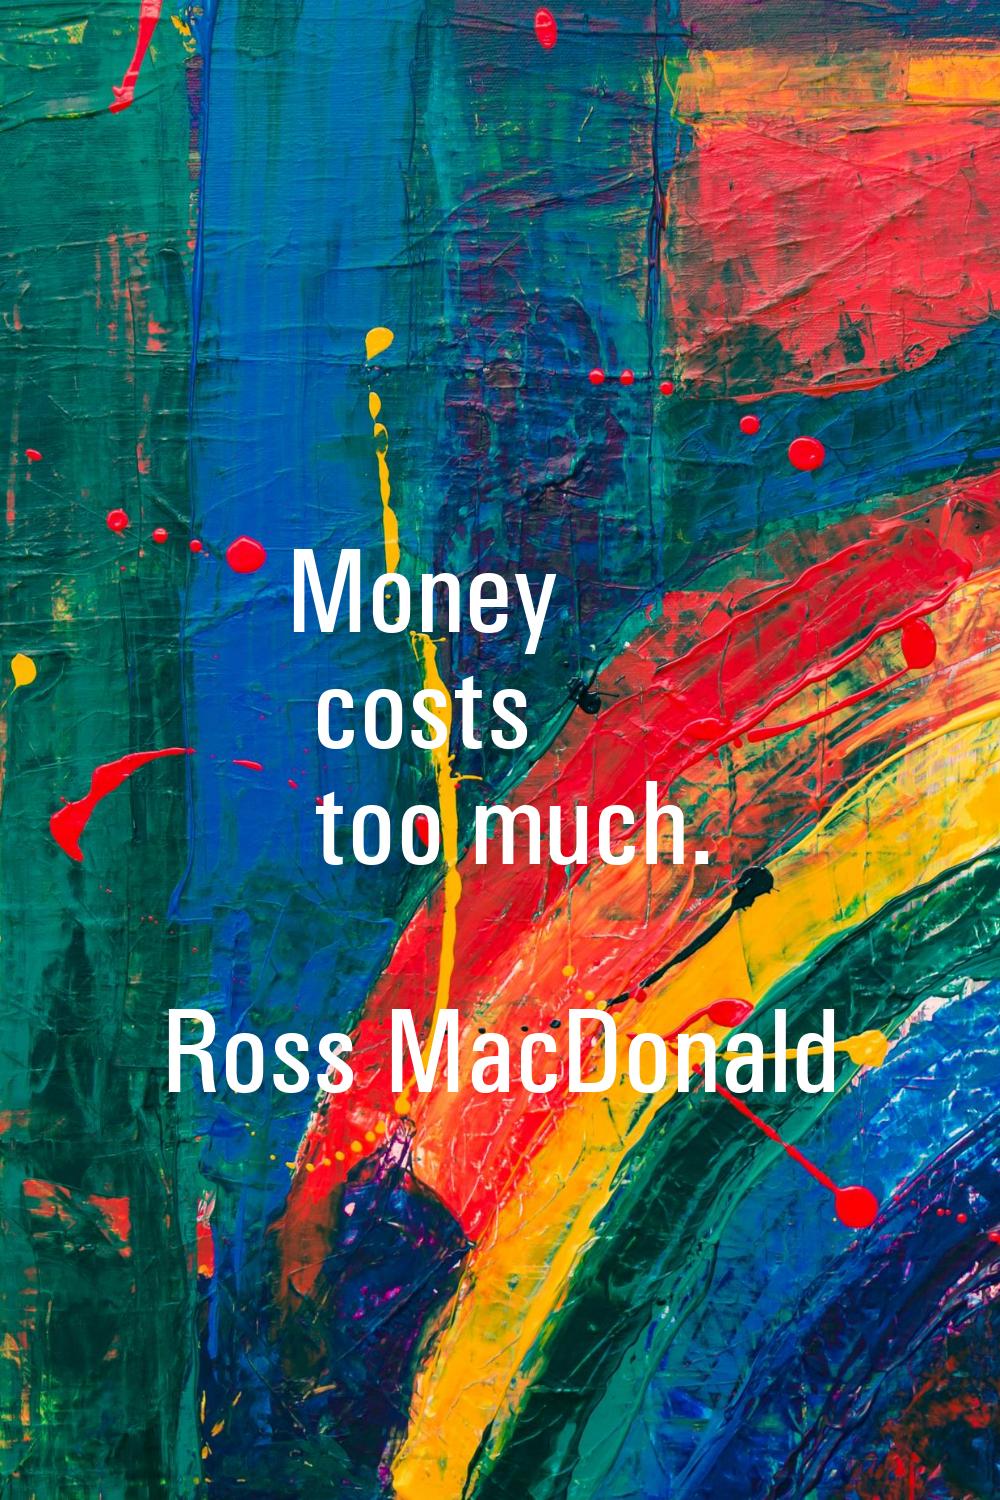 Money costs too much.